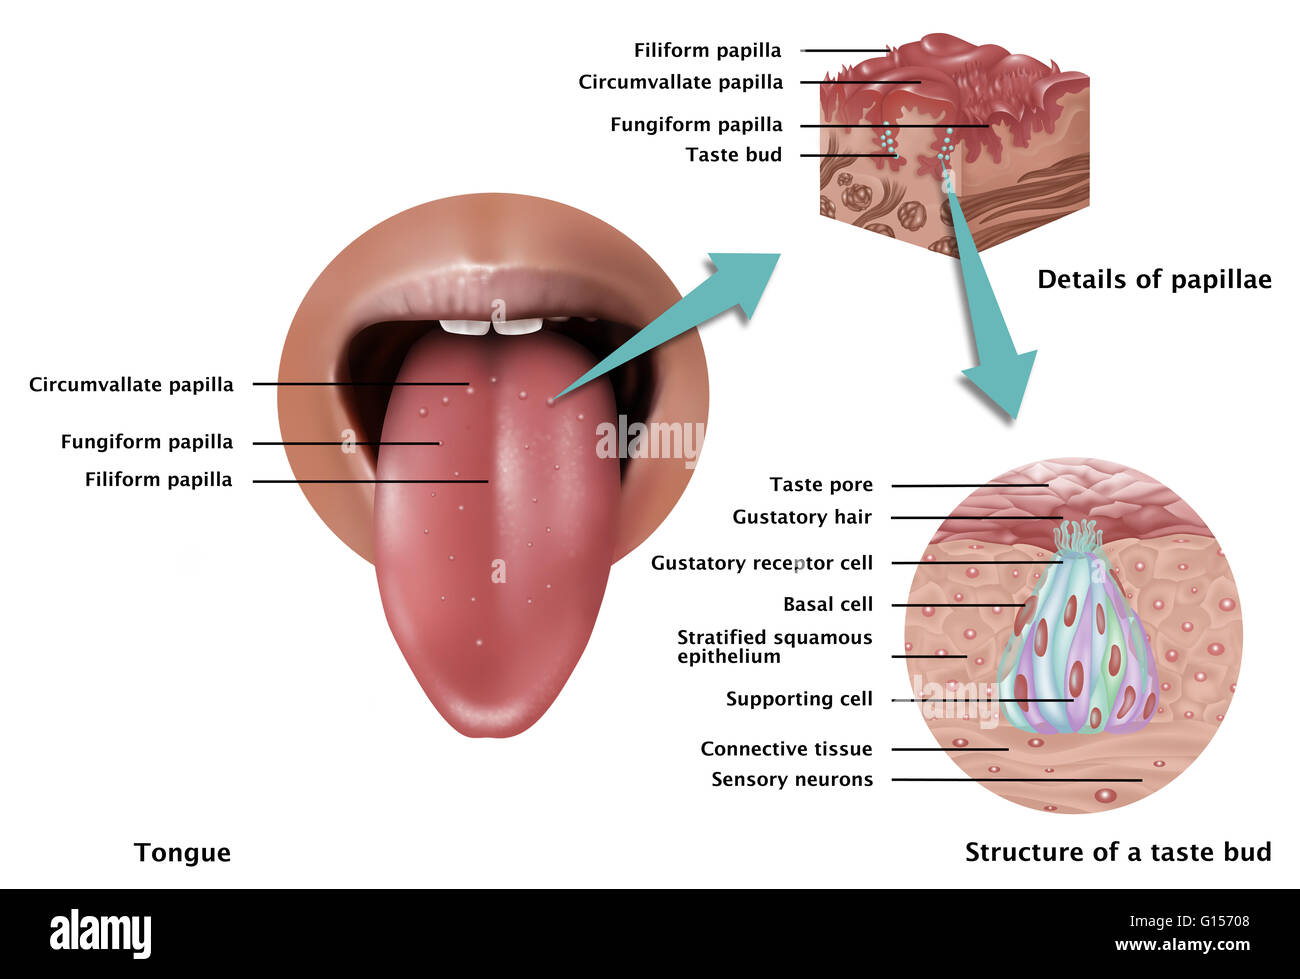 Illustration depicting the anatomy of taste. At left is an image of the tongue pointing out types of papilla found on the base of  the tongue: circumvallate papilla, fungiform papilla, & filiform papilla. Inset at right is a detailed close ups of papillae Stock Photo